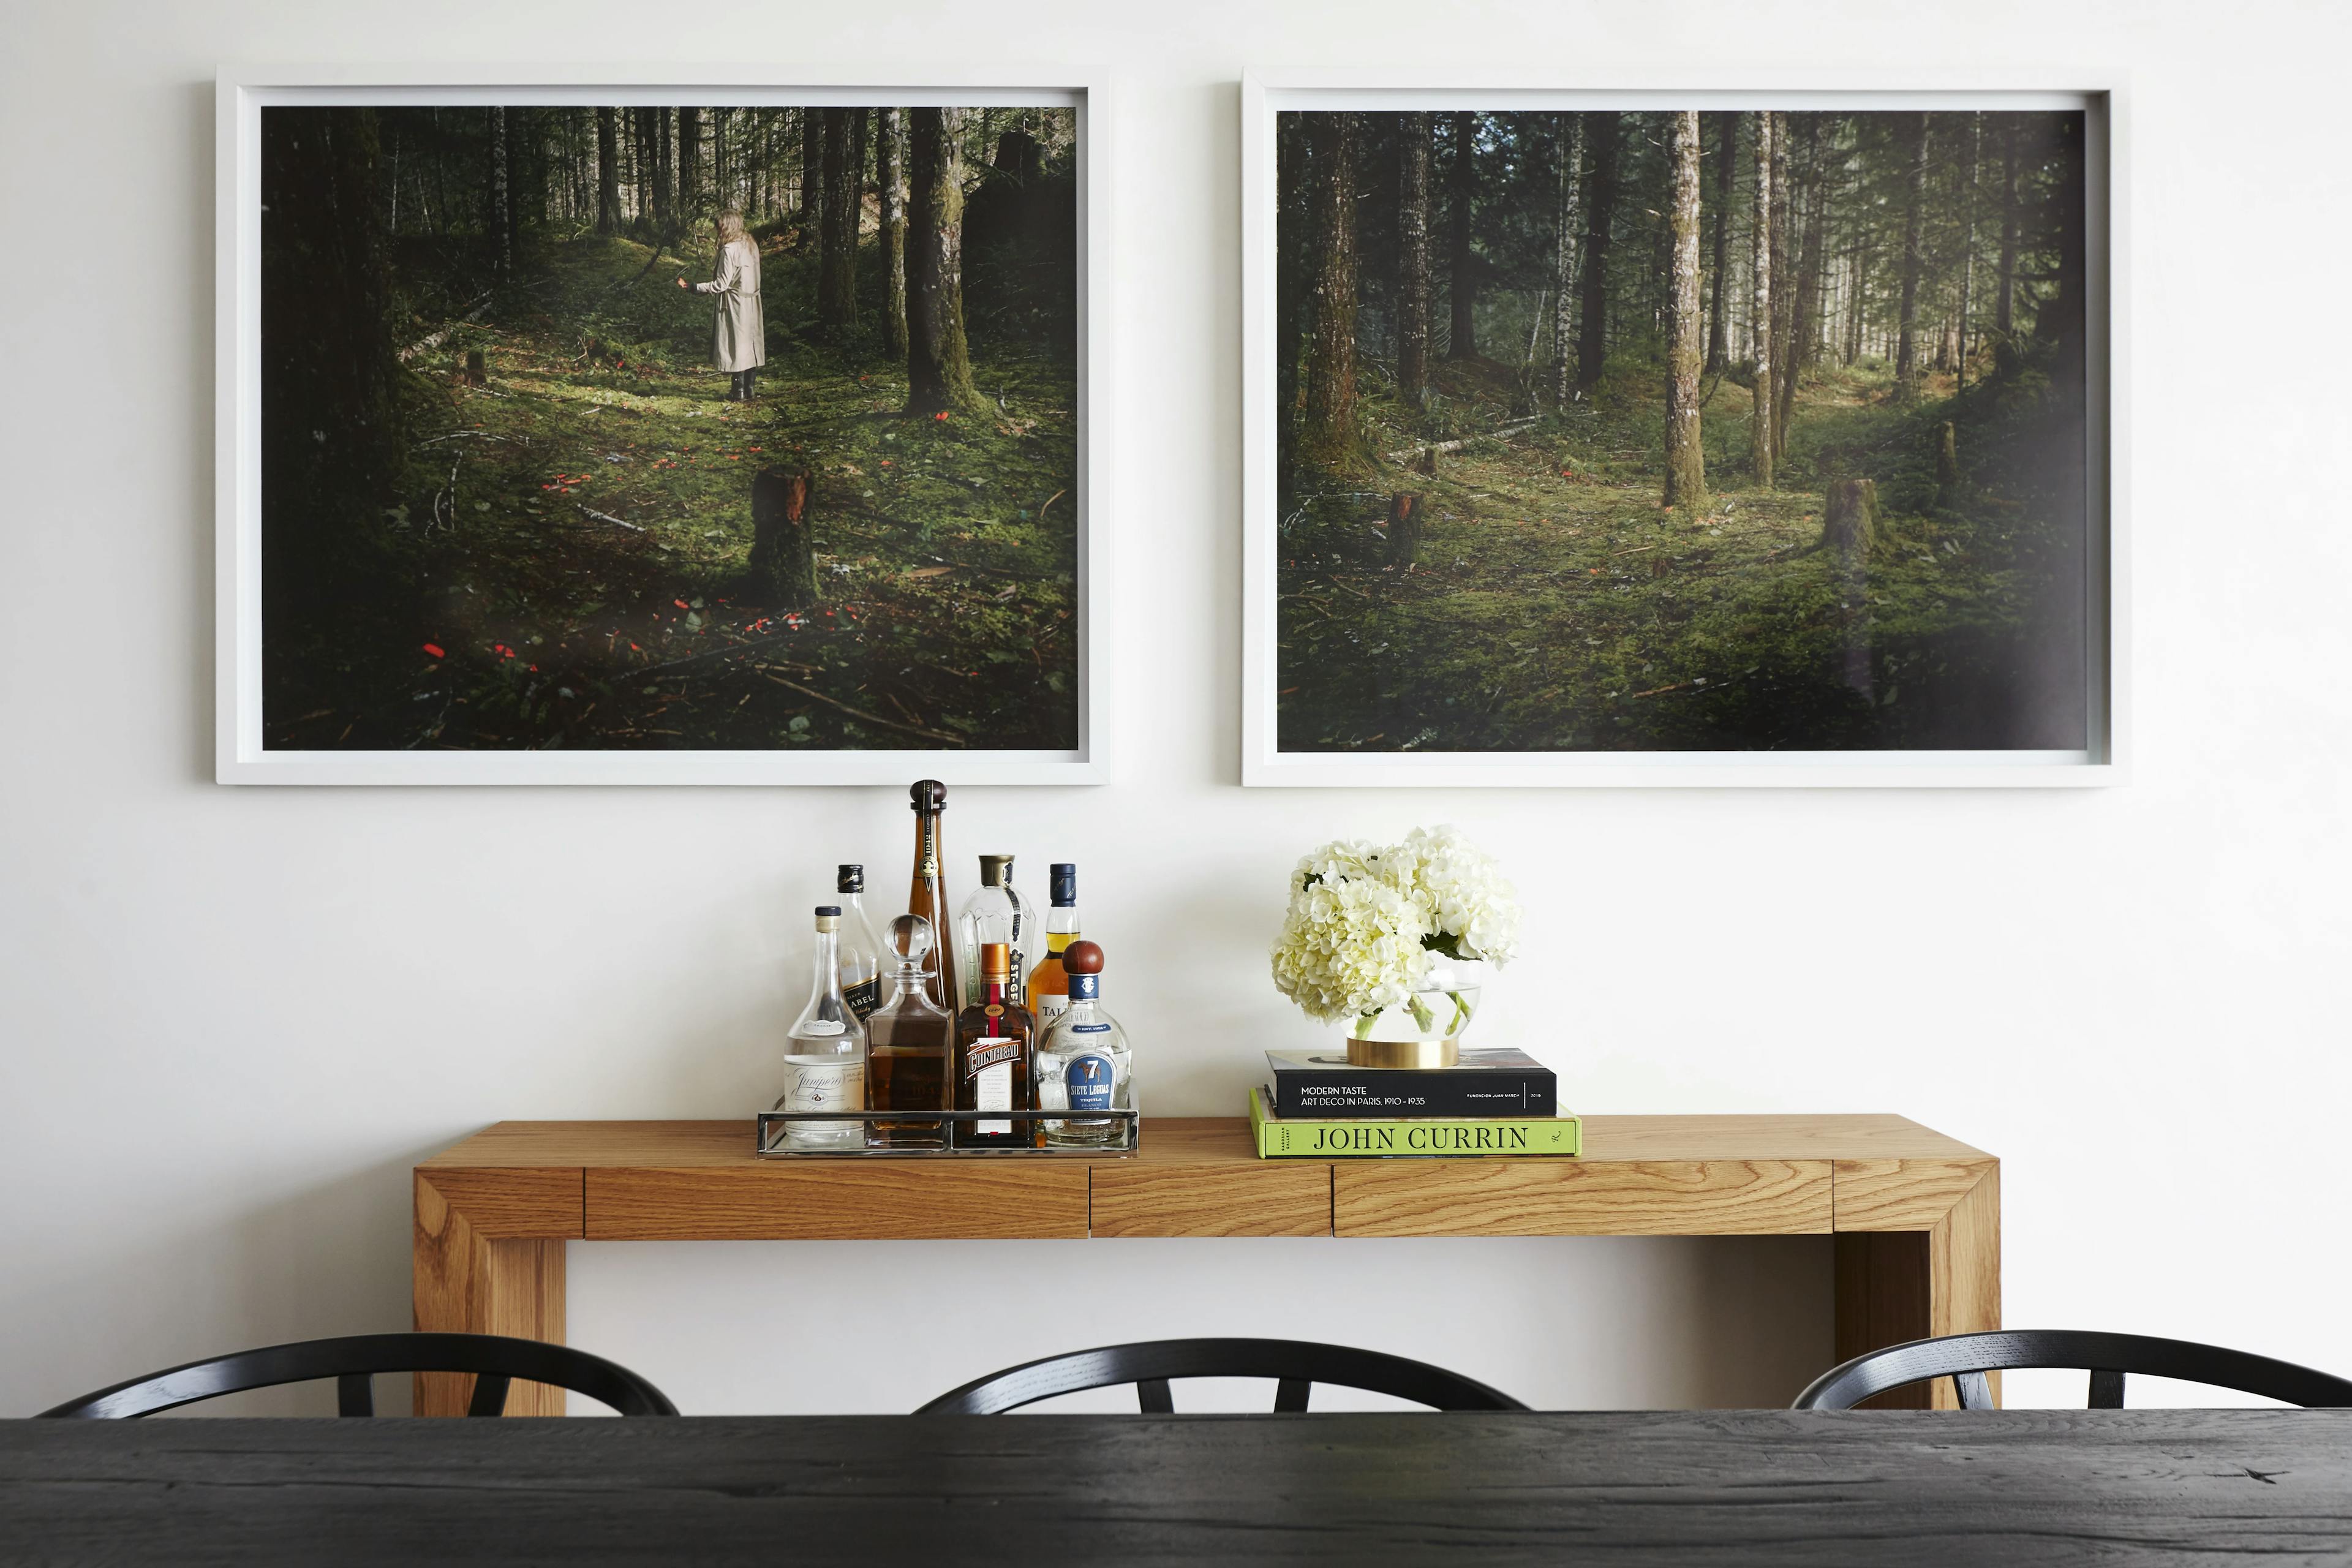 Two photographs of forests by Anna Beeke in a DUMBO dining room.